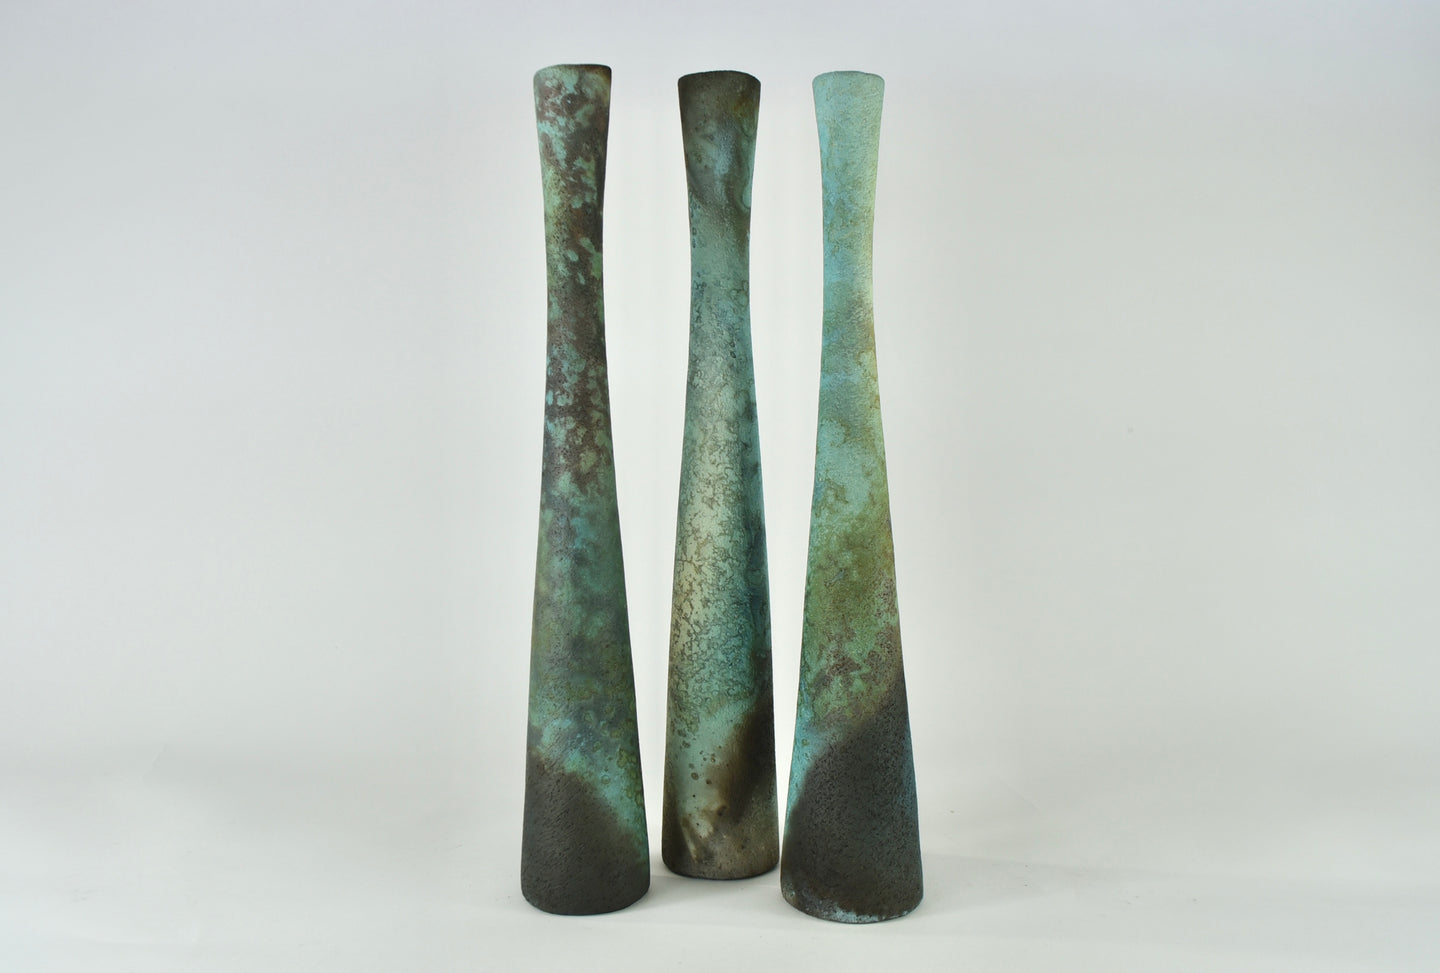 Tall textured smoke fired forms